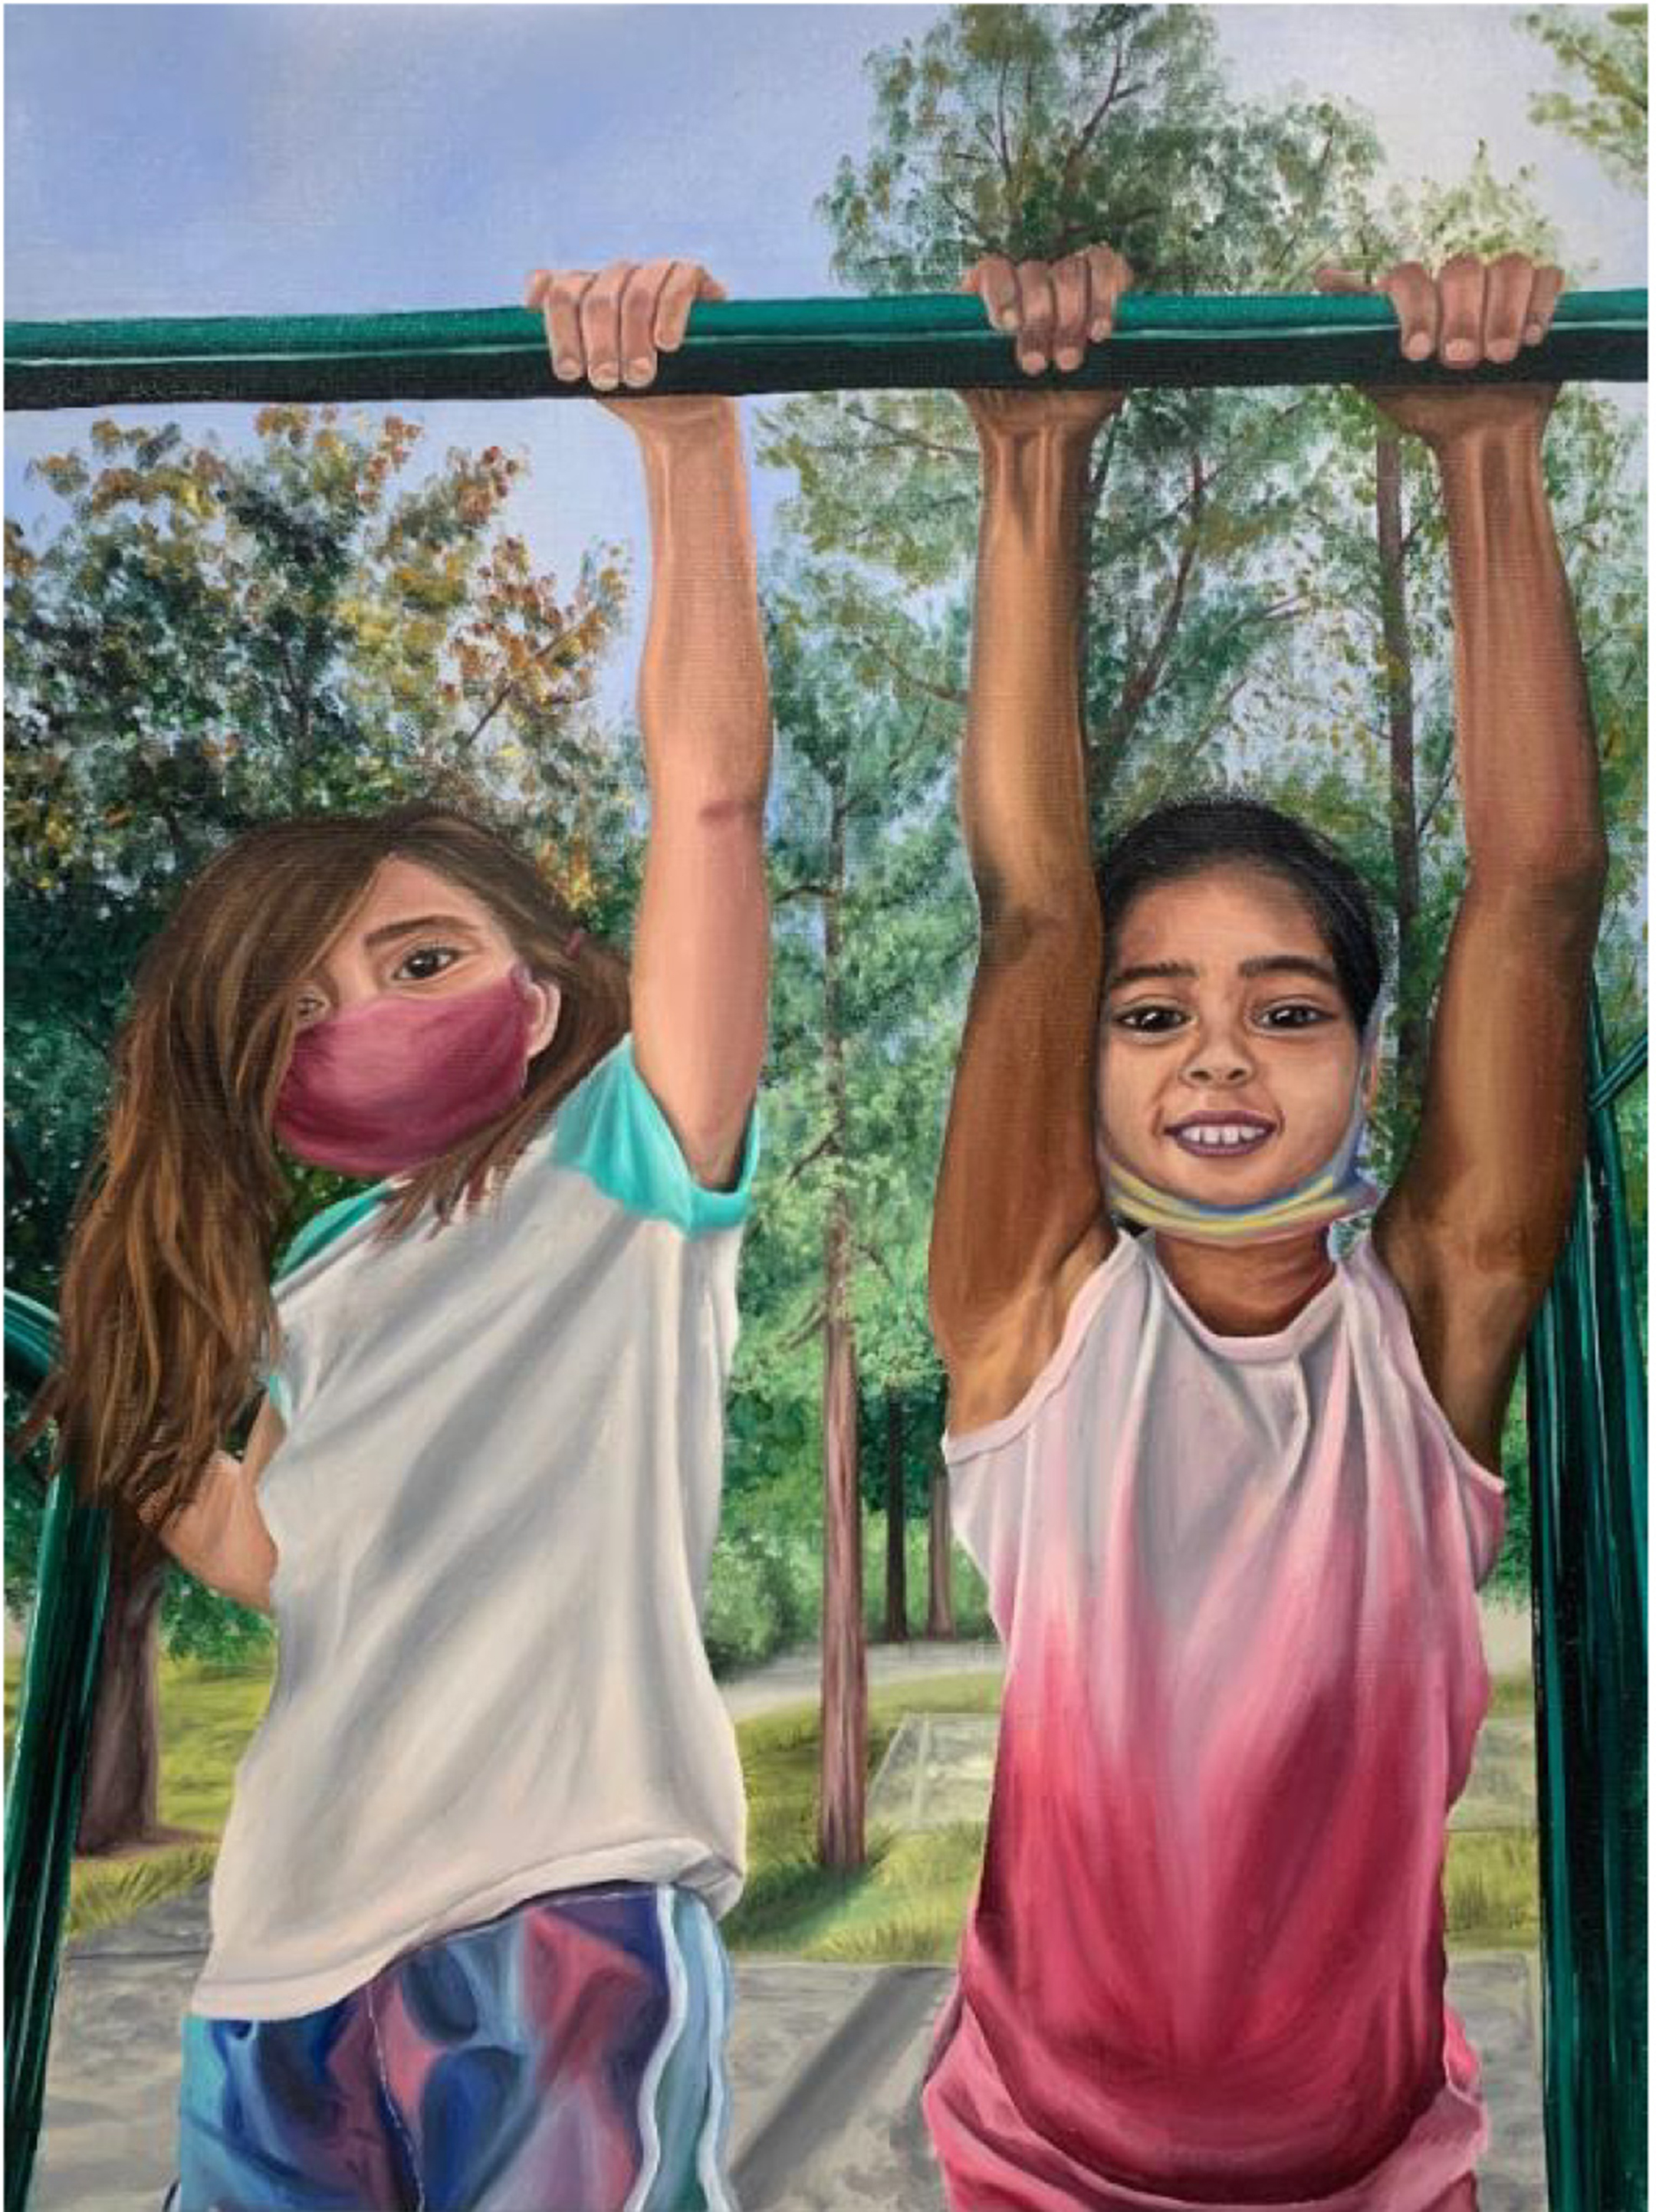 Painting of two young girls playing on a playground's monkey bars 